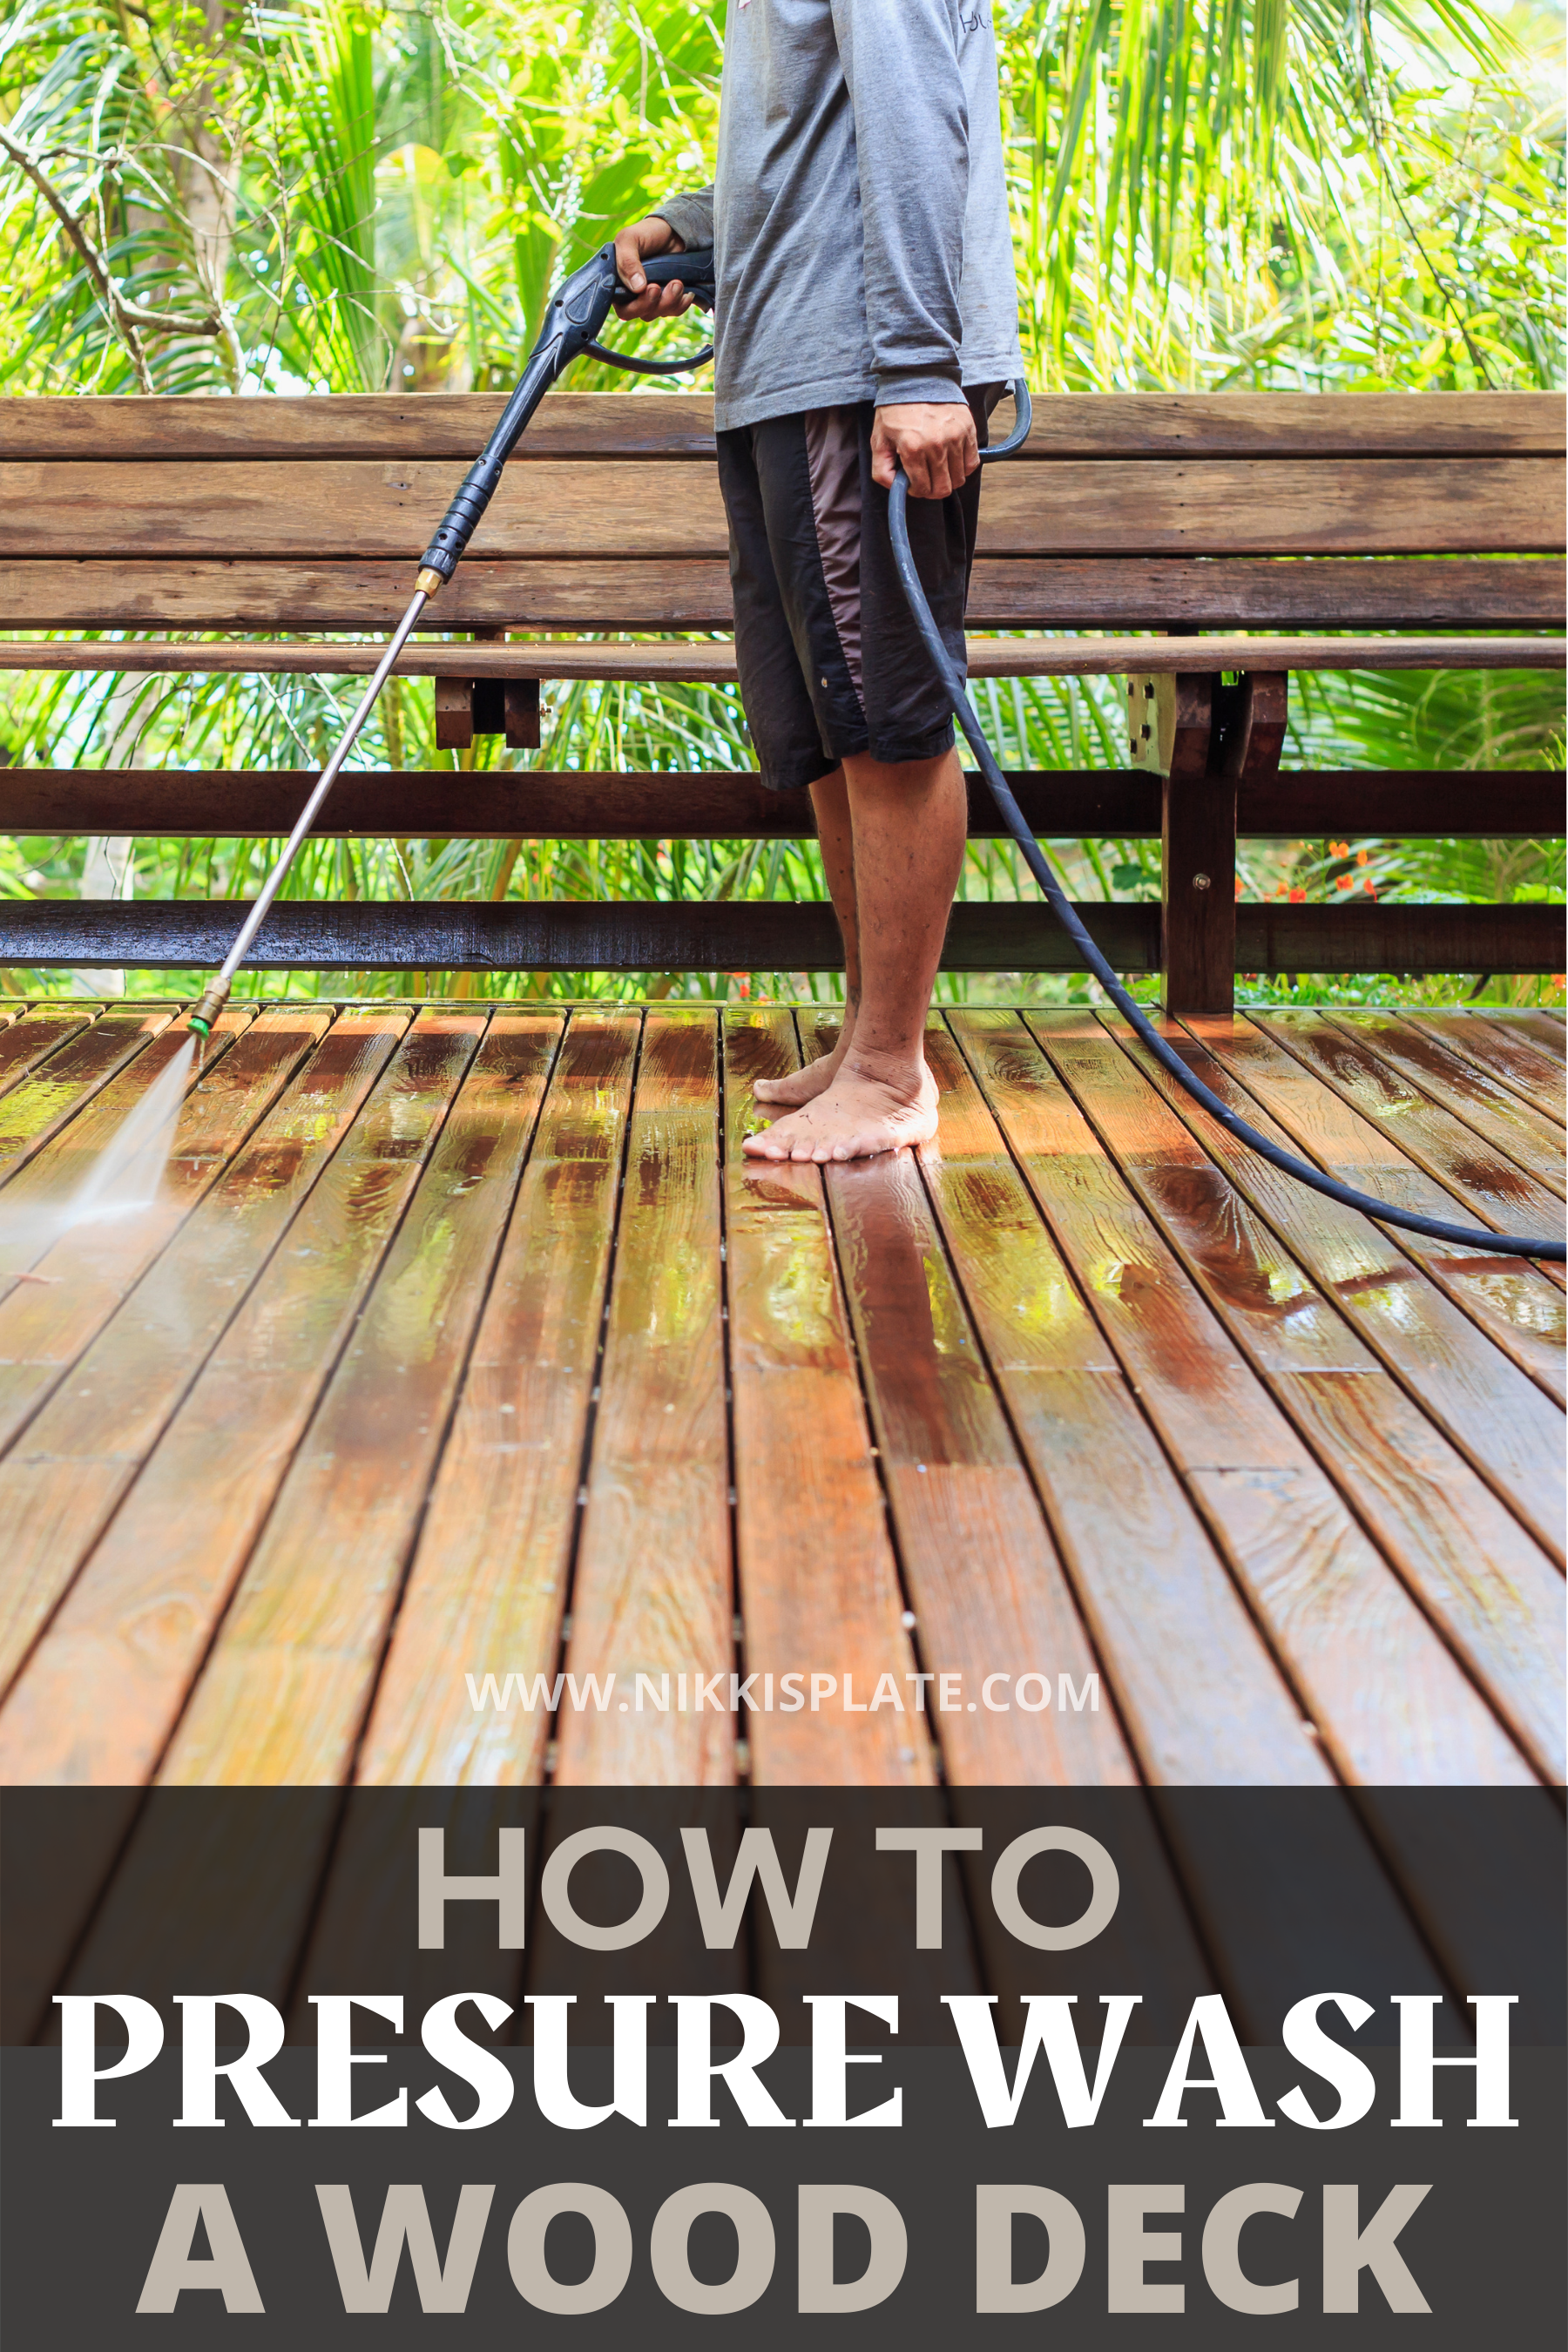 http://www.nikkisplate.com/wp-content/uploads/2022/06/How-to-Pressure-Wash-a-WOOD-Deck.png